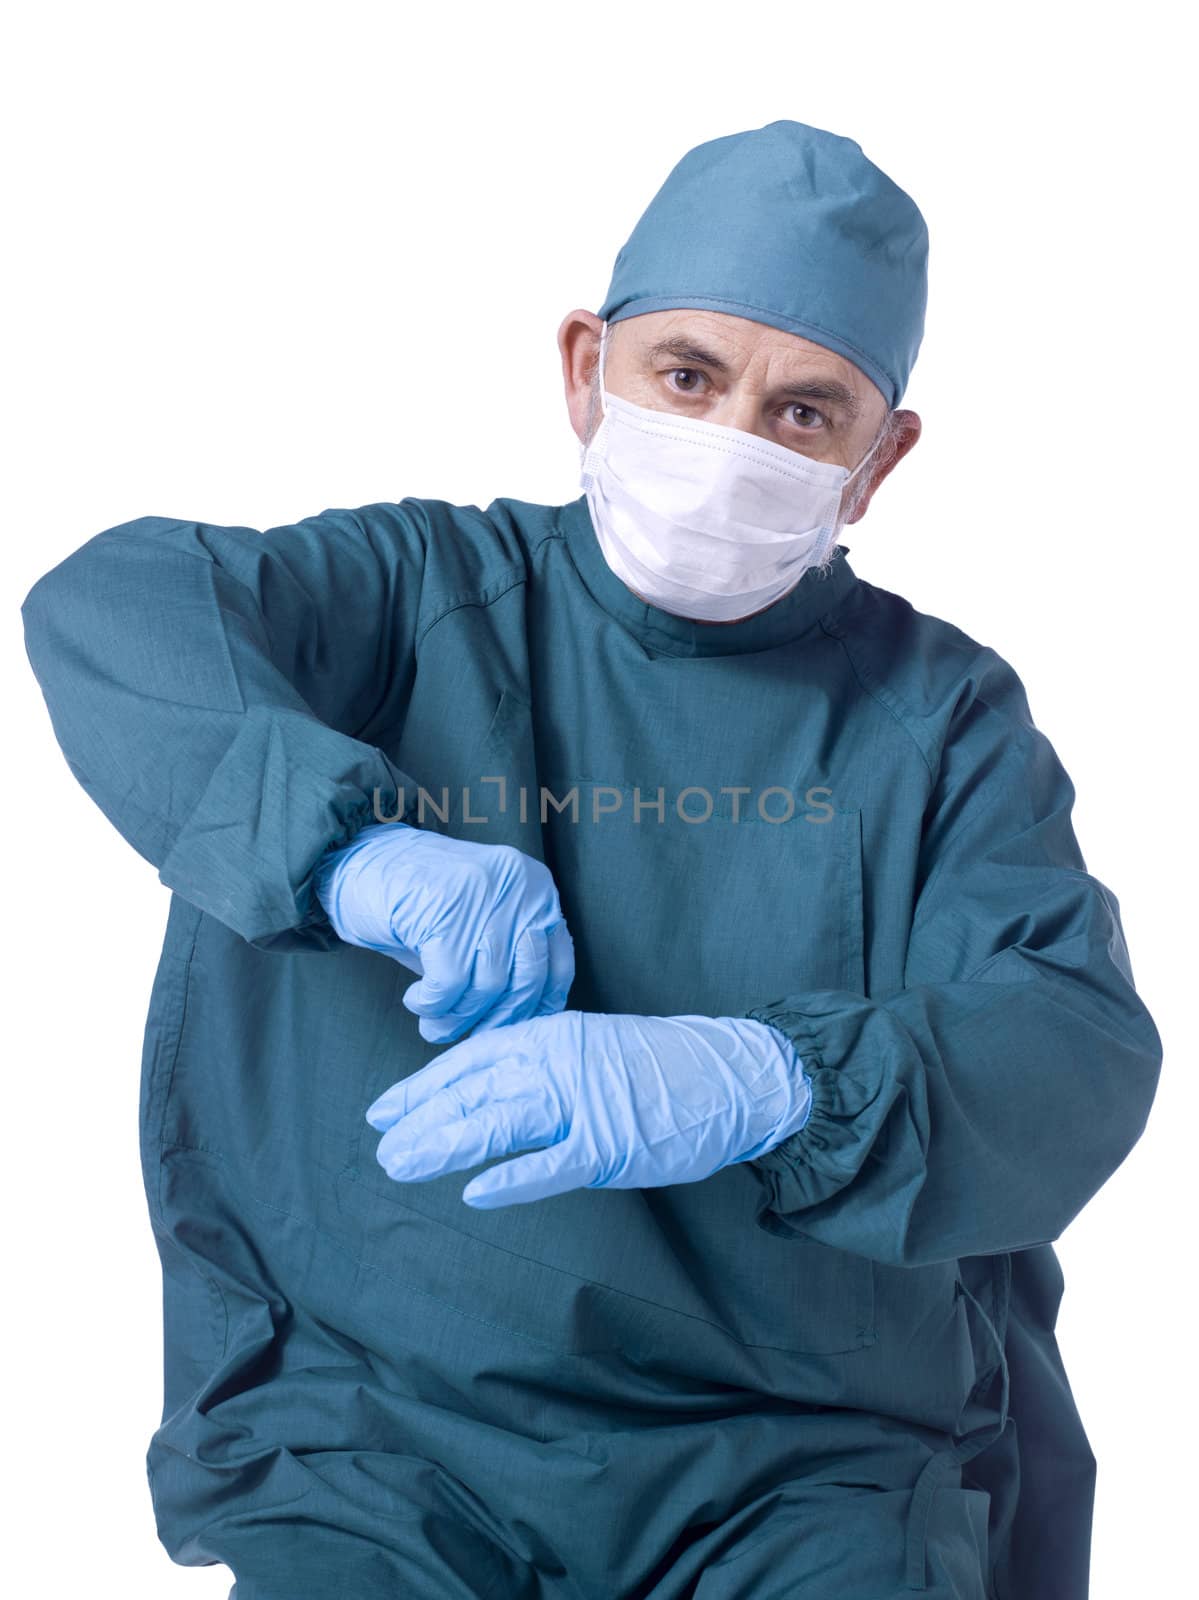  Portrait of a surgeon doctor wearing a sterile blue gown and preparing himself against white background